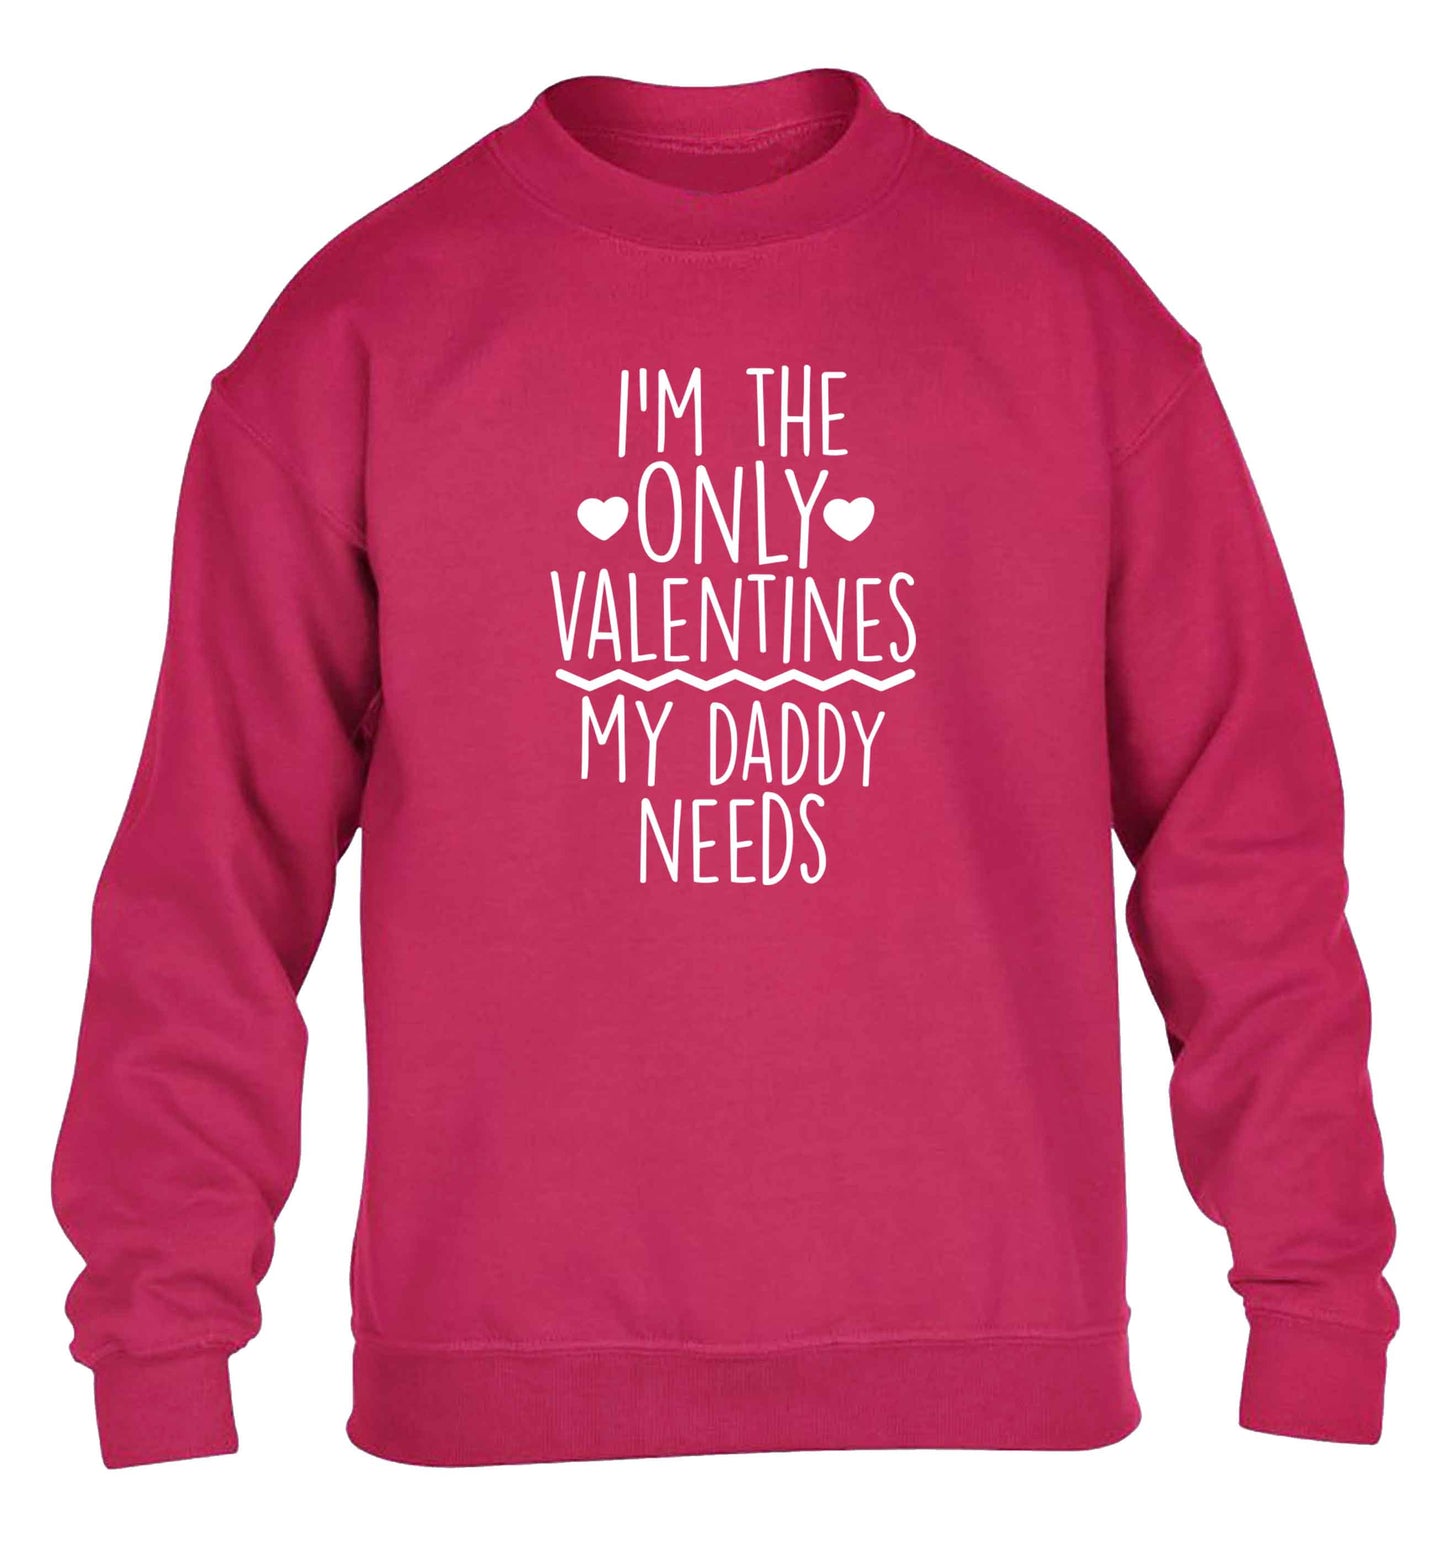 I'm the only valentines my daddy needs children's pink sweater 12-13 Years